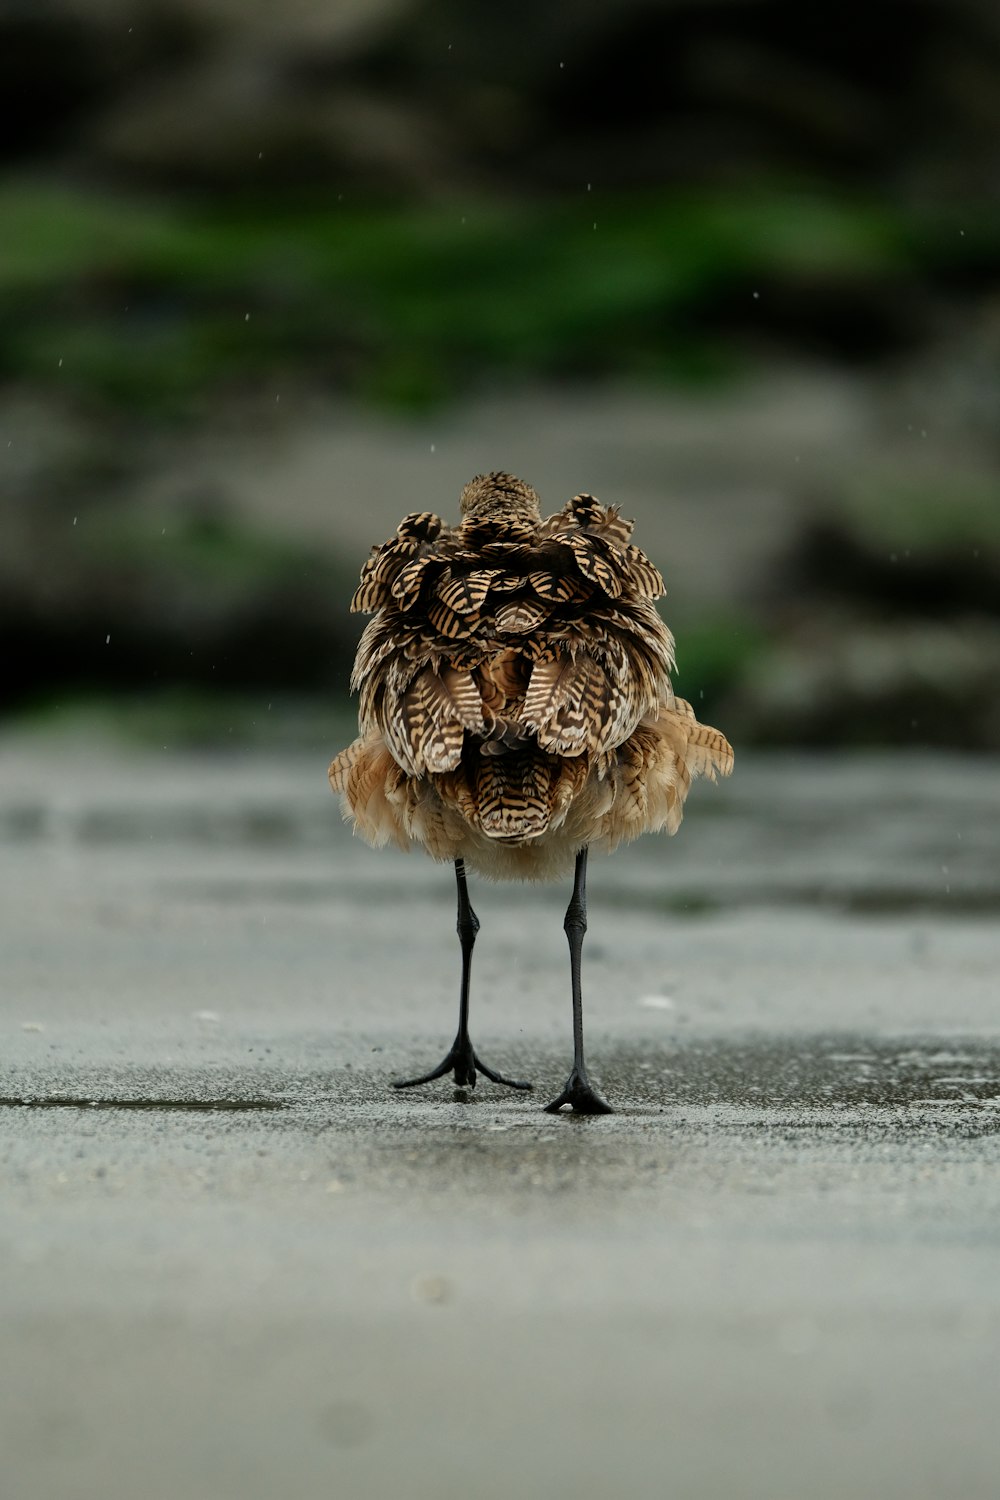 a small bird standing on top of a wet ground